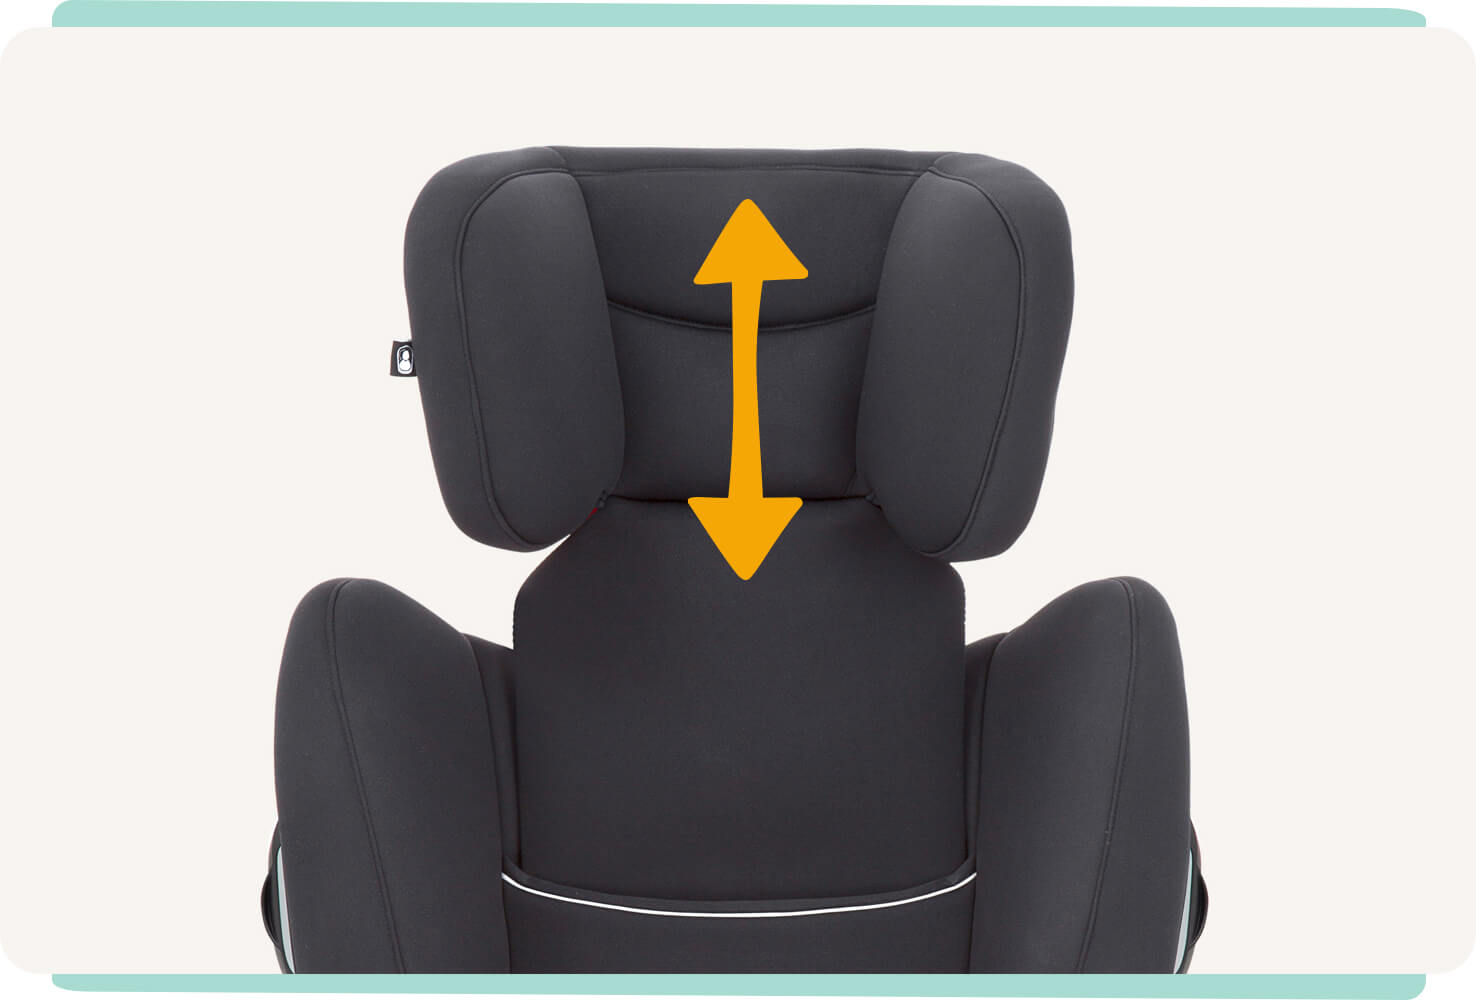 Closeup on Transcend booster car seat headrest with an orange arrow indicating the height adjustment.